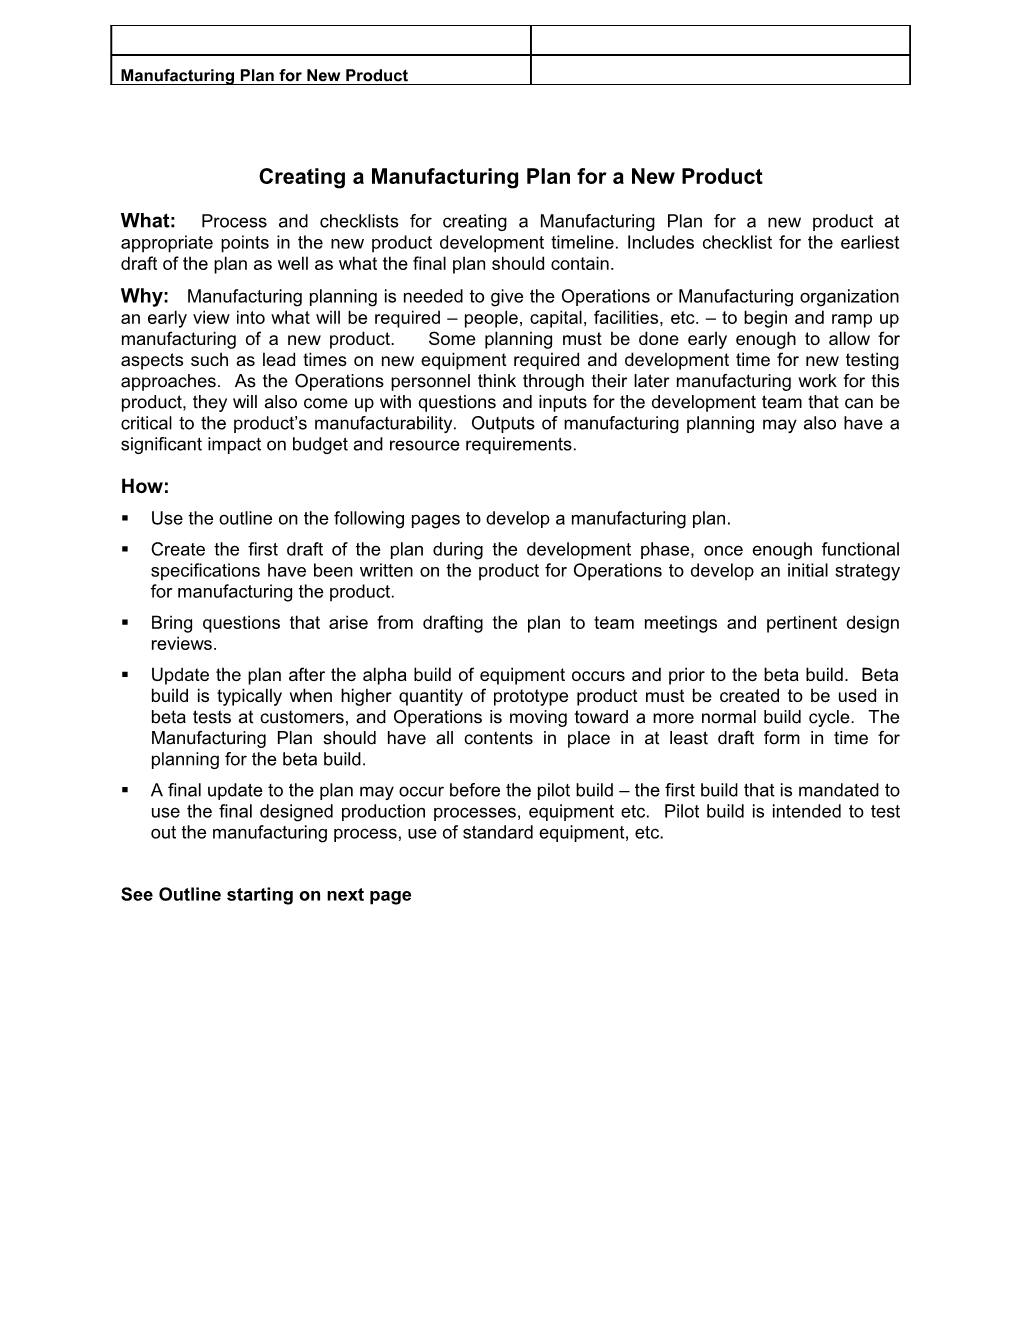 Creating a Manufacturing Plan for a New Product